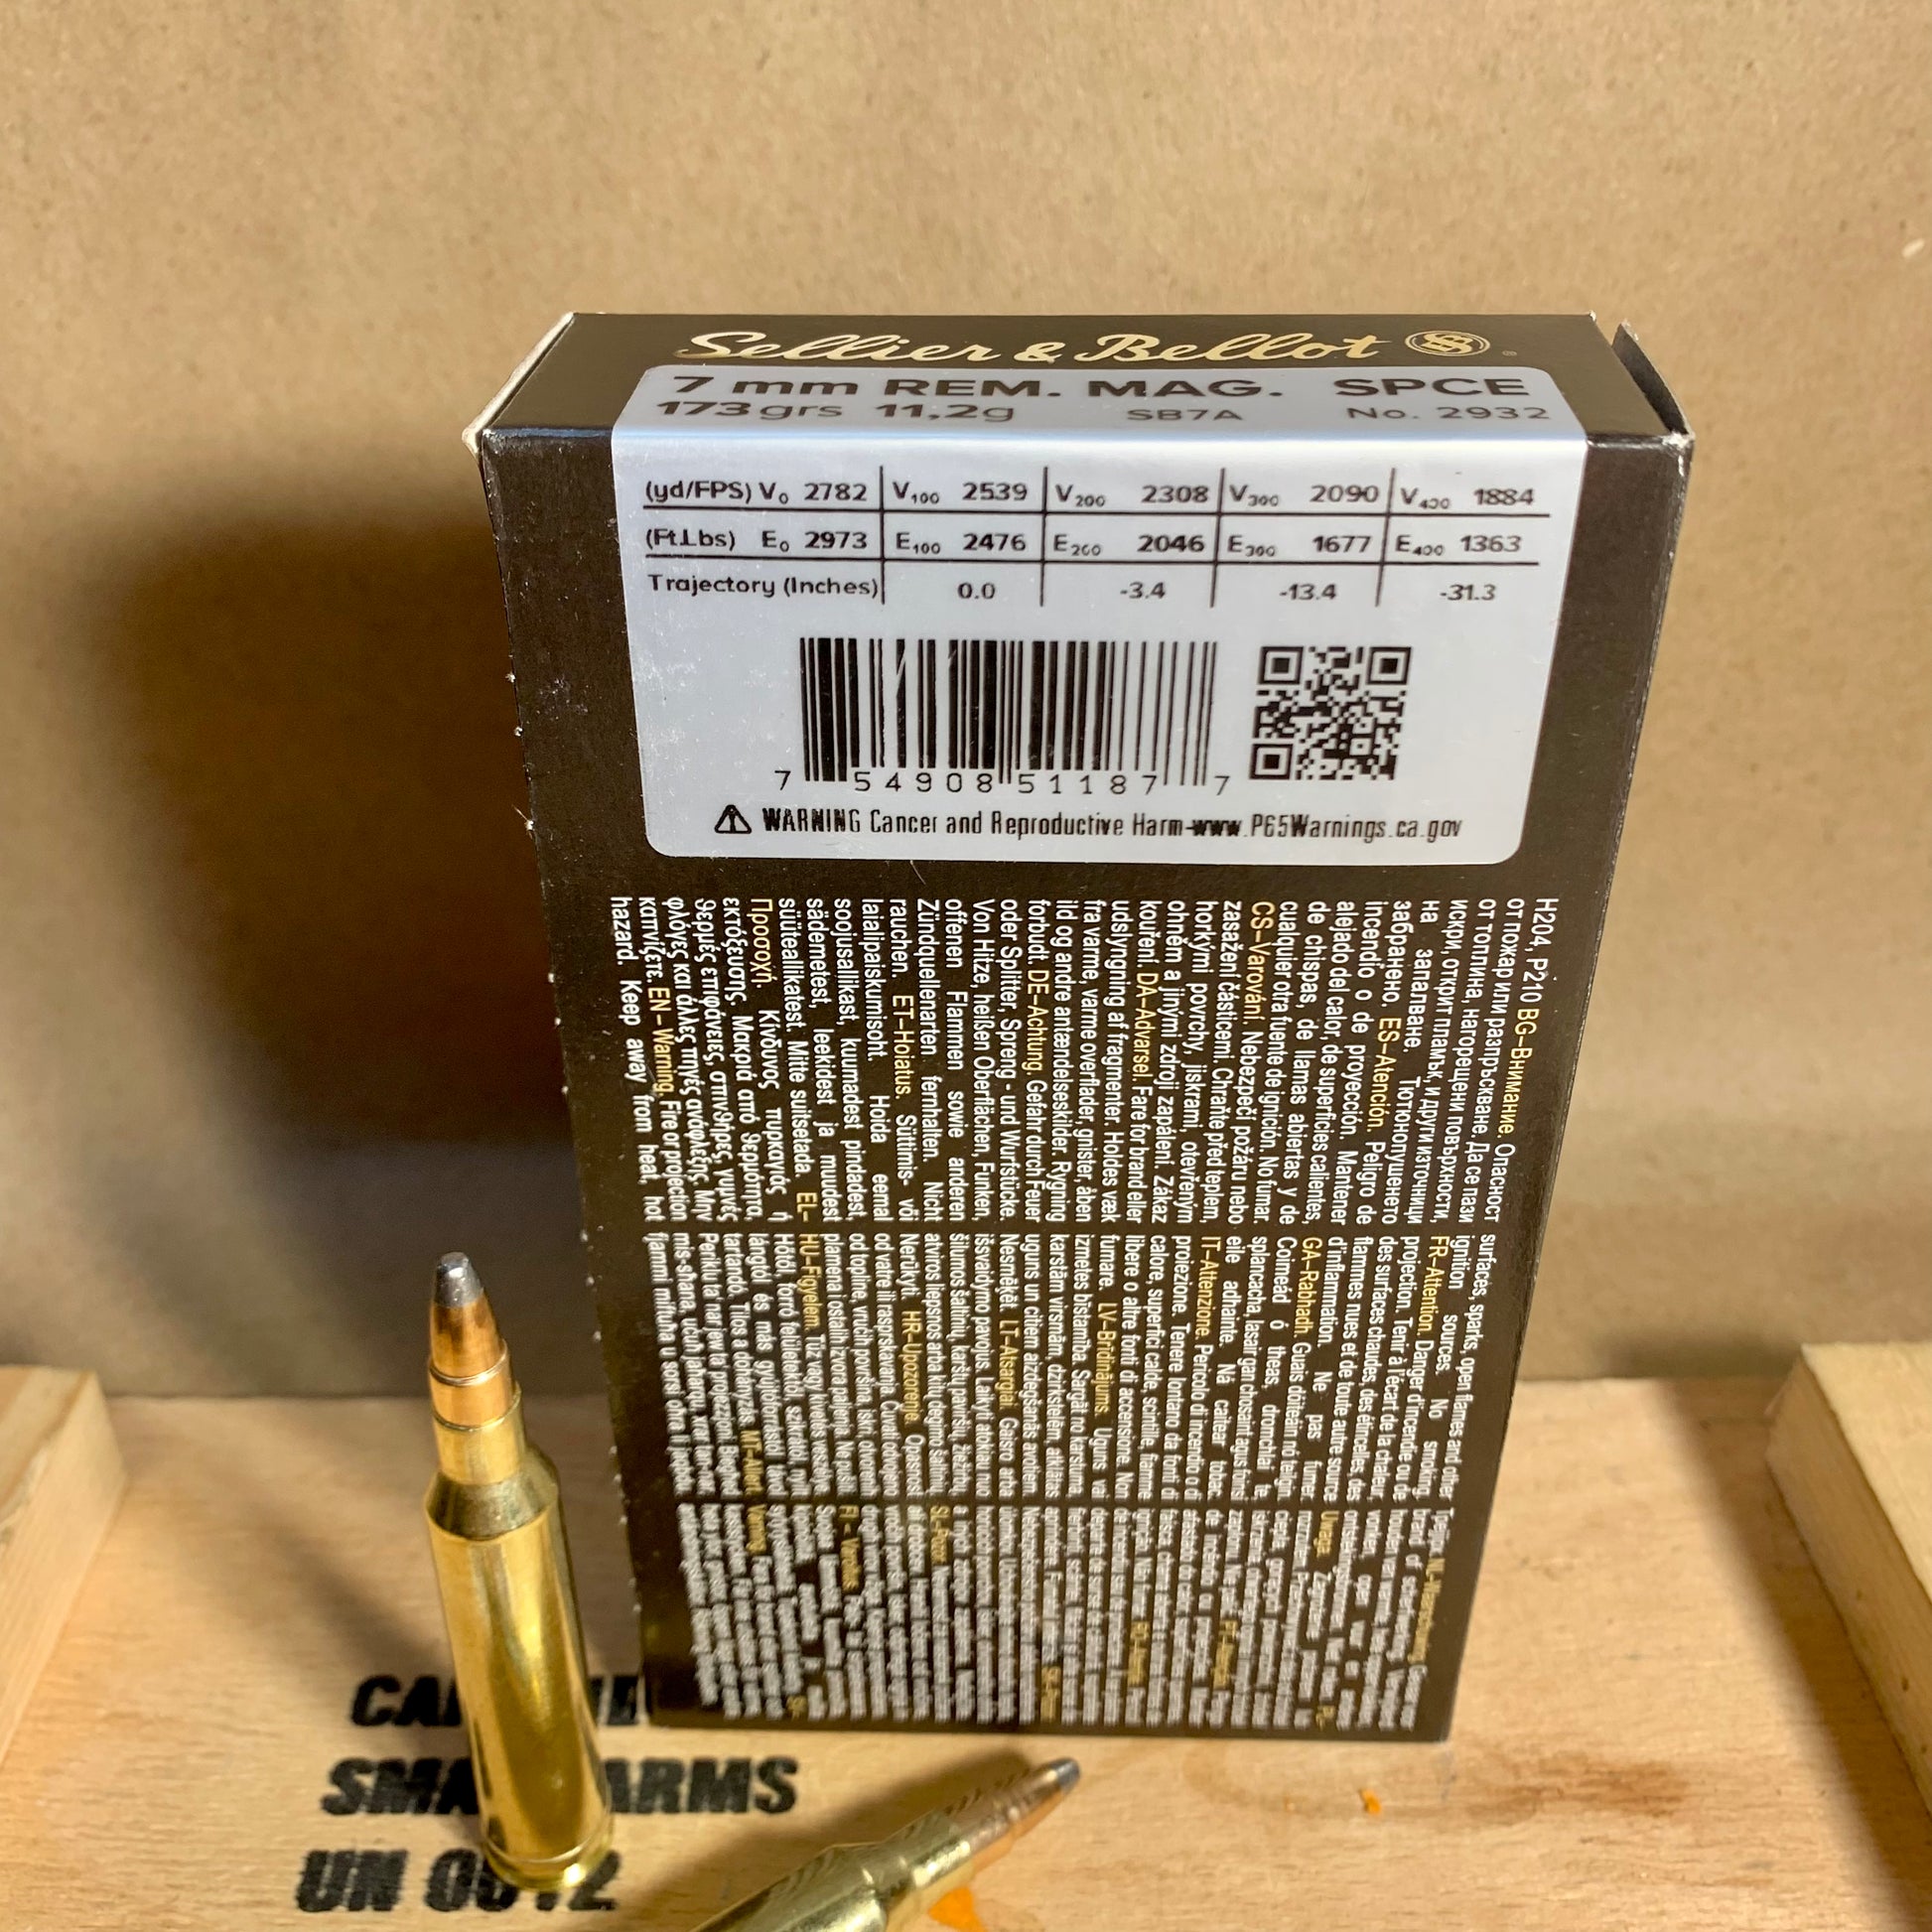 20 Round Box Sellier & Bellot 7mm Rem. Mag Ammo 173gr SPCE - SB7A